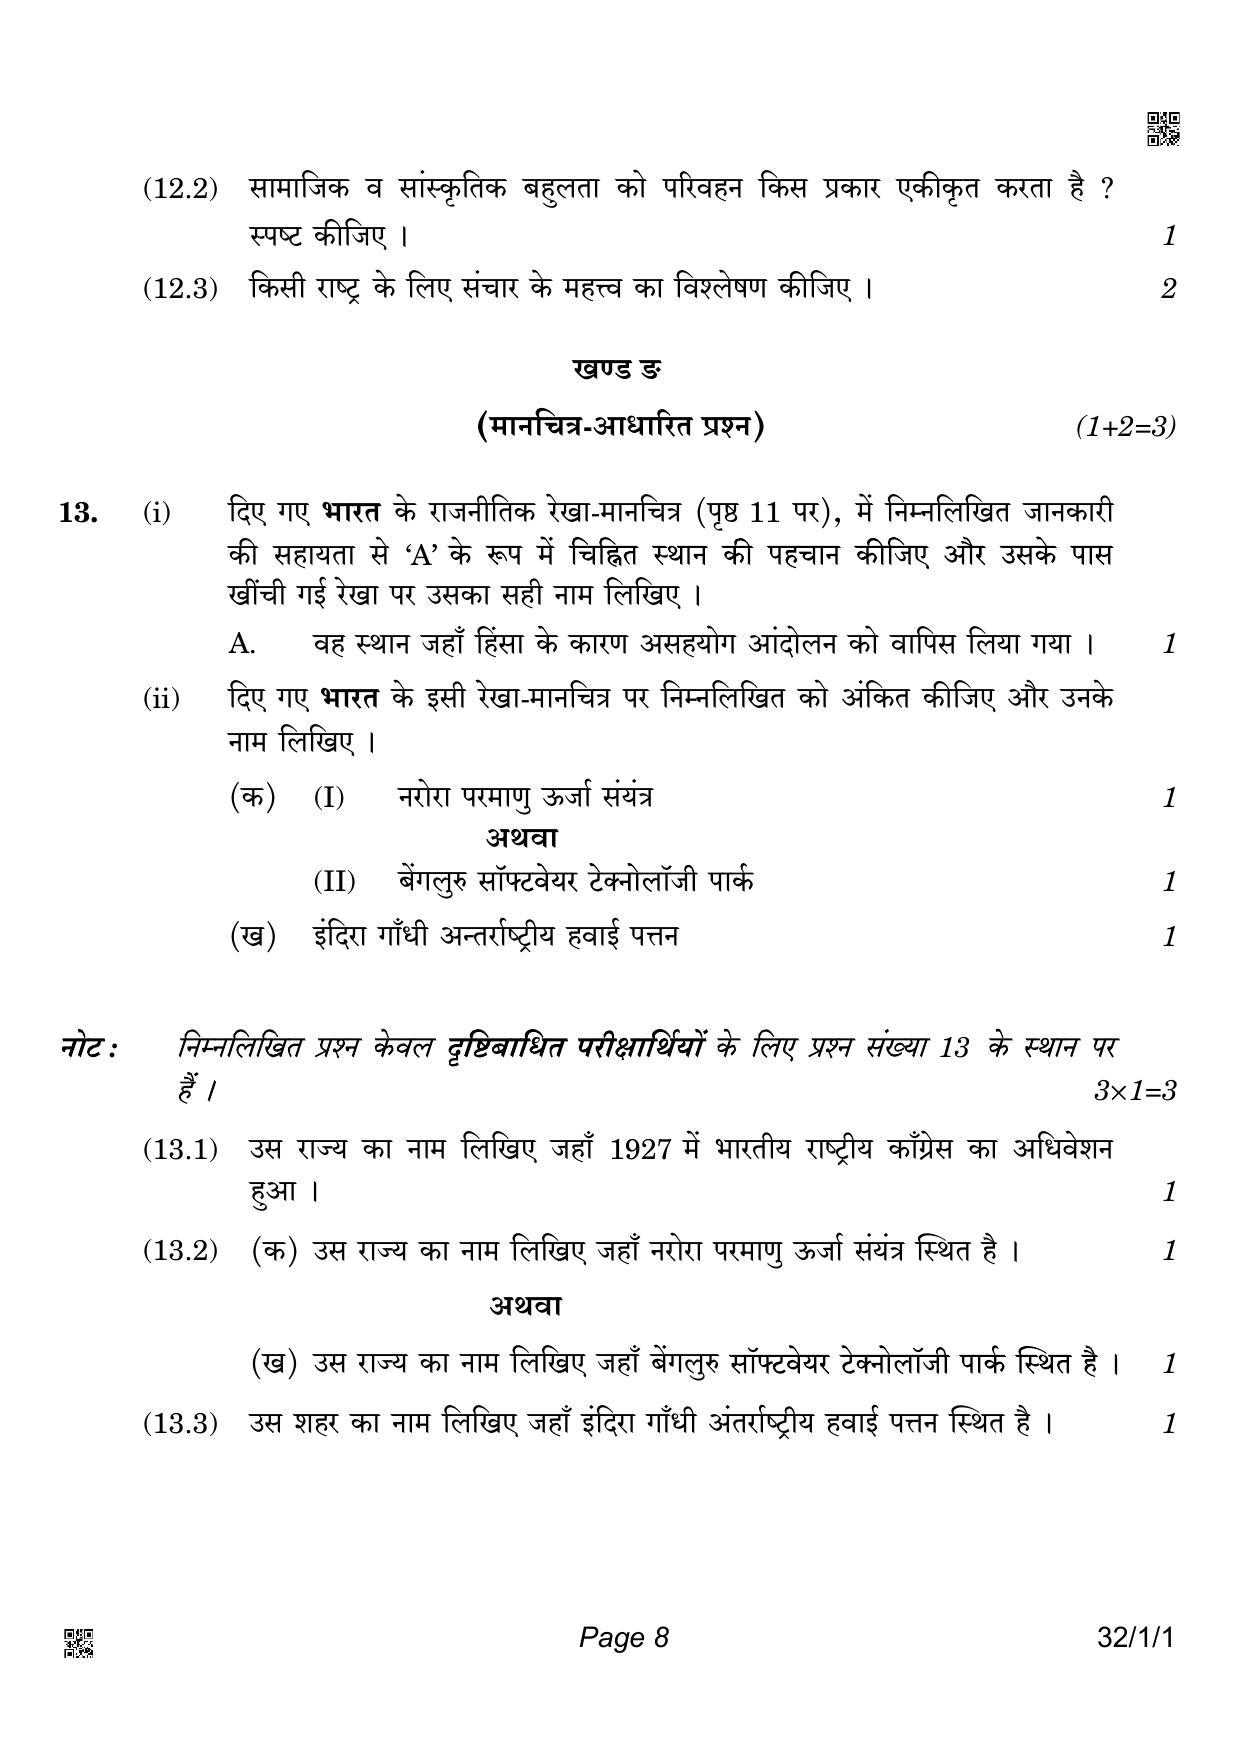 CBSE Class 10 32-1-1 Social Science 2022 Question Paper - Page 8